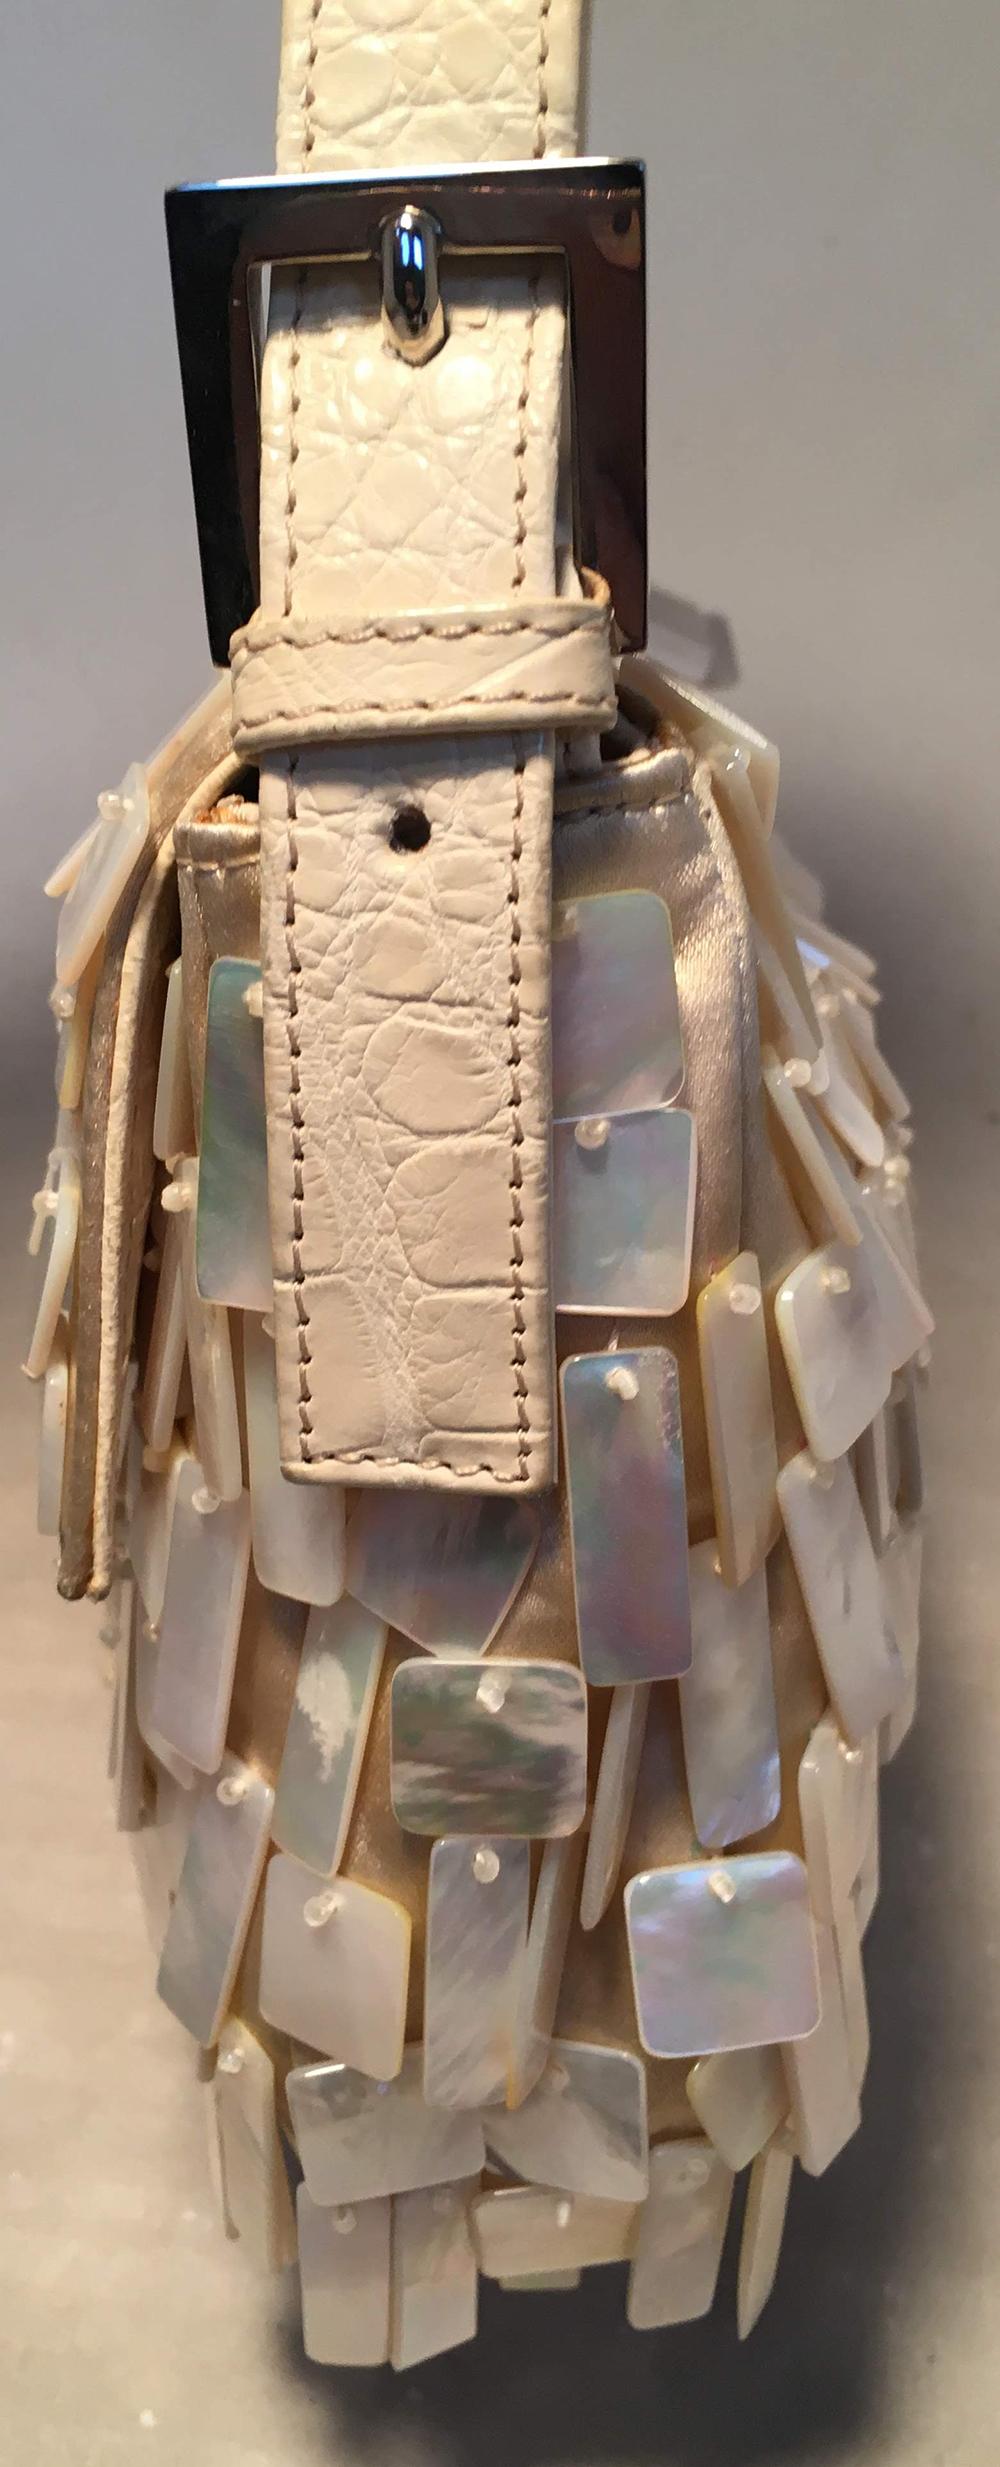 Fendi Cream Satin Mother of Pearl Shell Baguette in excellent condition. Cream satin body with natural cream mother of pearl square and rectangle beads attached throughout exterior. Cream alligator adjustable shoulder strap and front strap logo